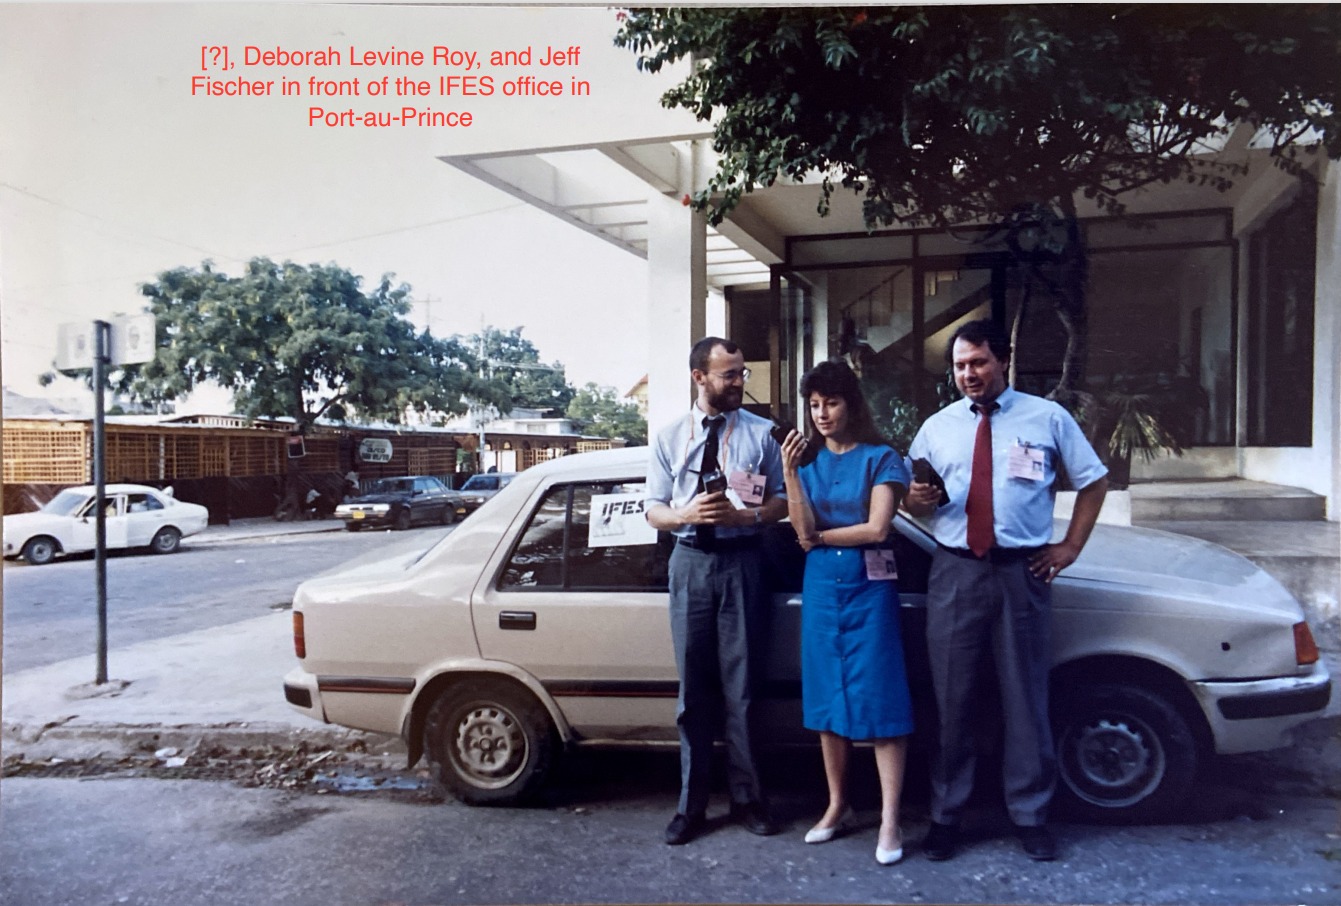  Ray Kennedy, Deborah Levine Roy, and Jeff Fischer outside of the IFES office in Port-au-Prince.